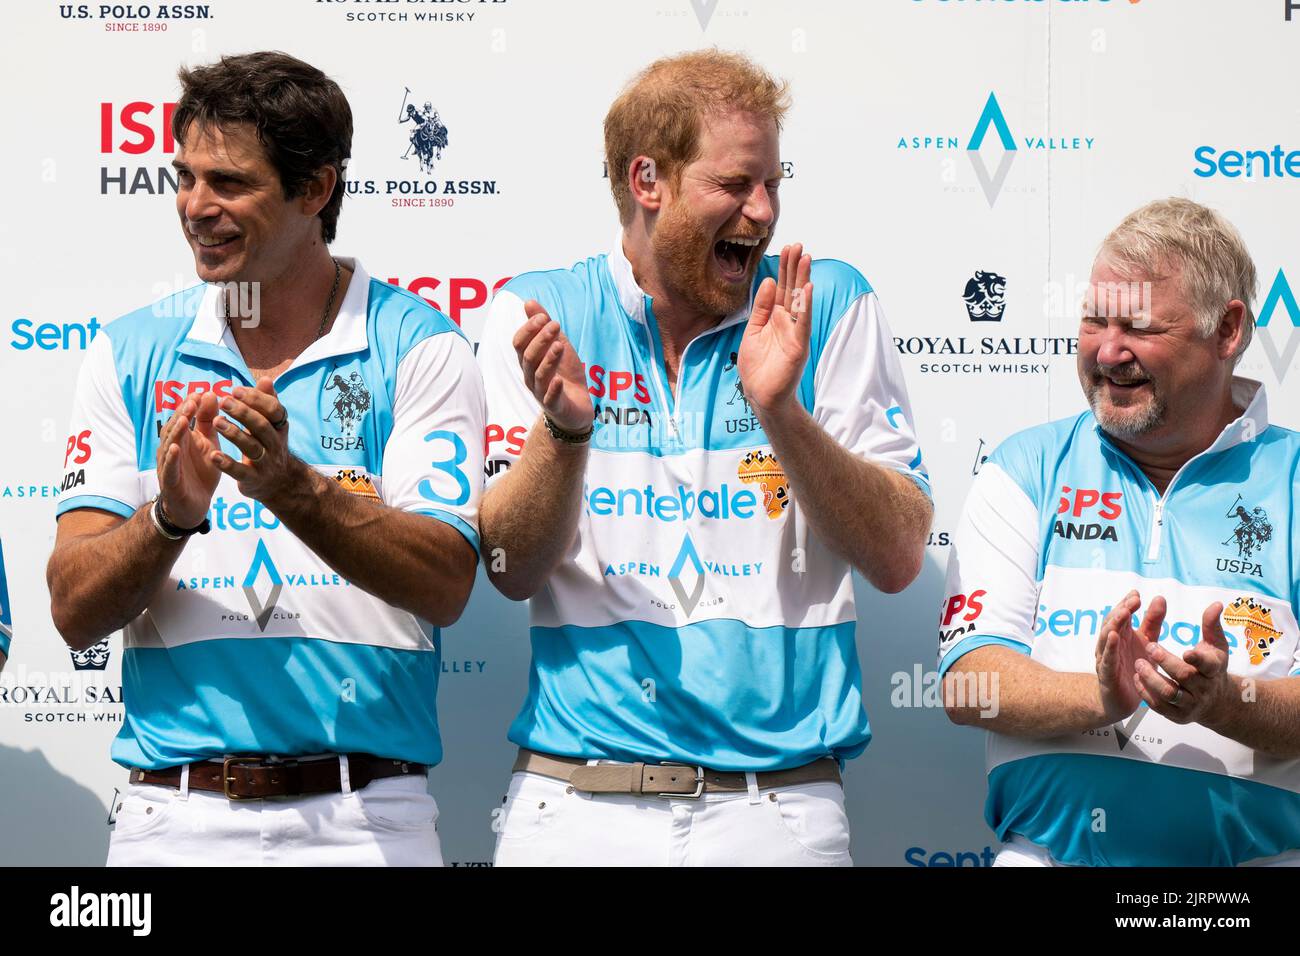 The Duke of Sussex and Nacho Figueras (left) during a prize giving ceremony after taking part in a polo match during the Sentebale ISPS Handa Polo Cup at the Aspen Valley Polo Club in Carbondale, Colorado in the United States. Picture date: Thursday August 25, 2022. Stock Photo